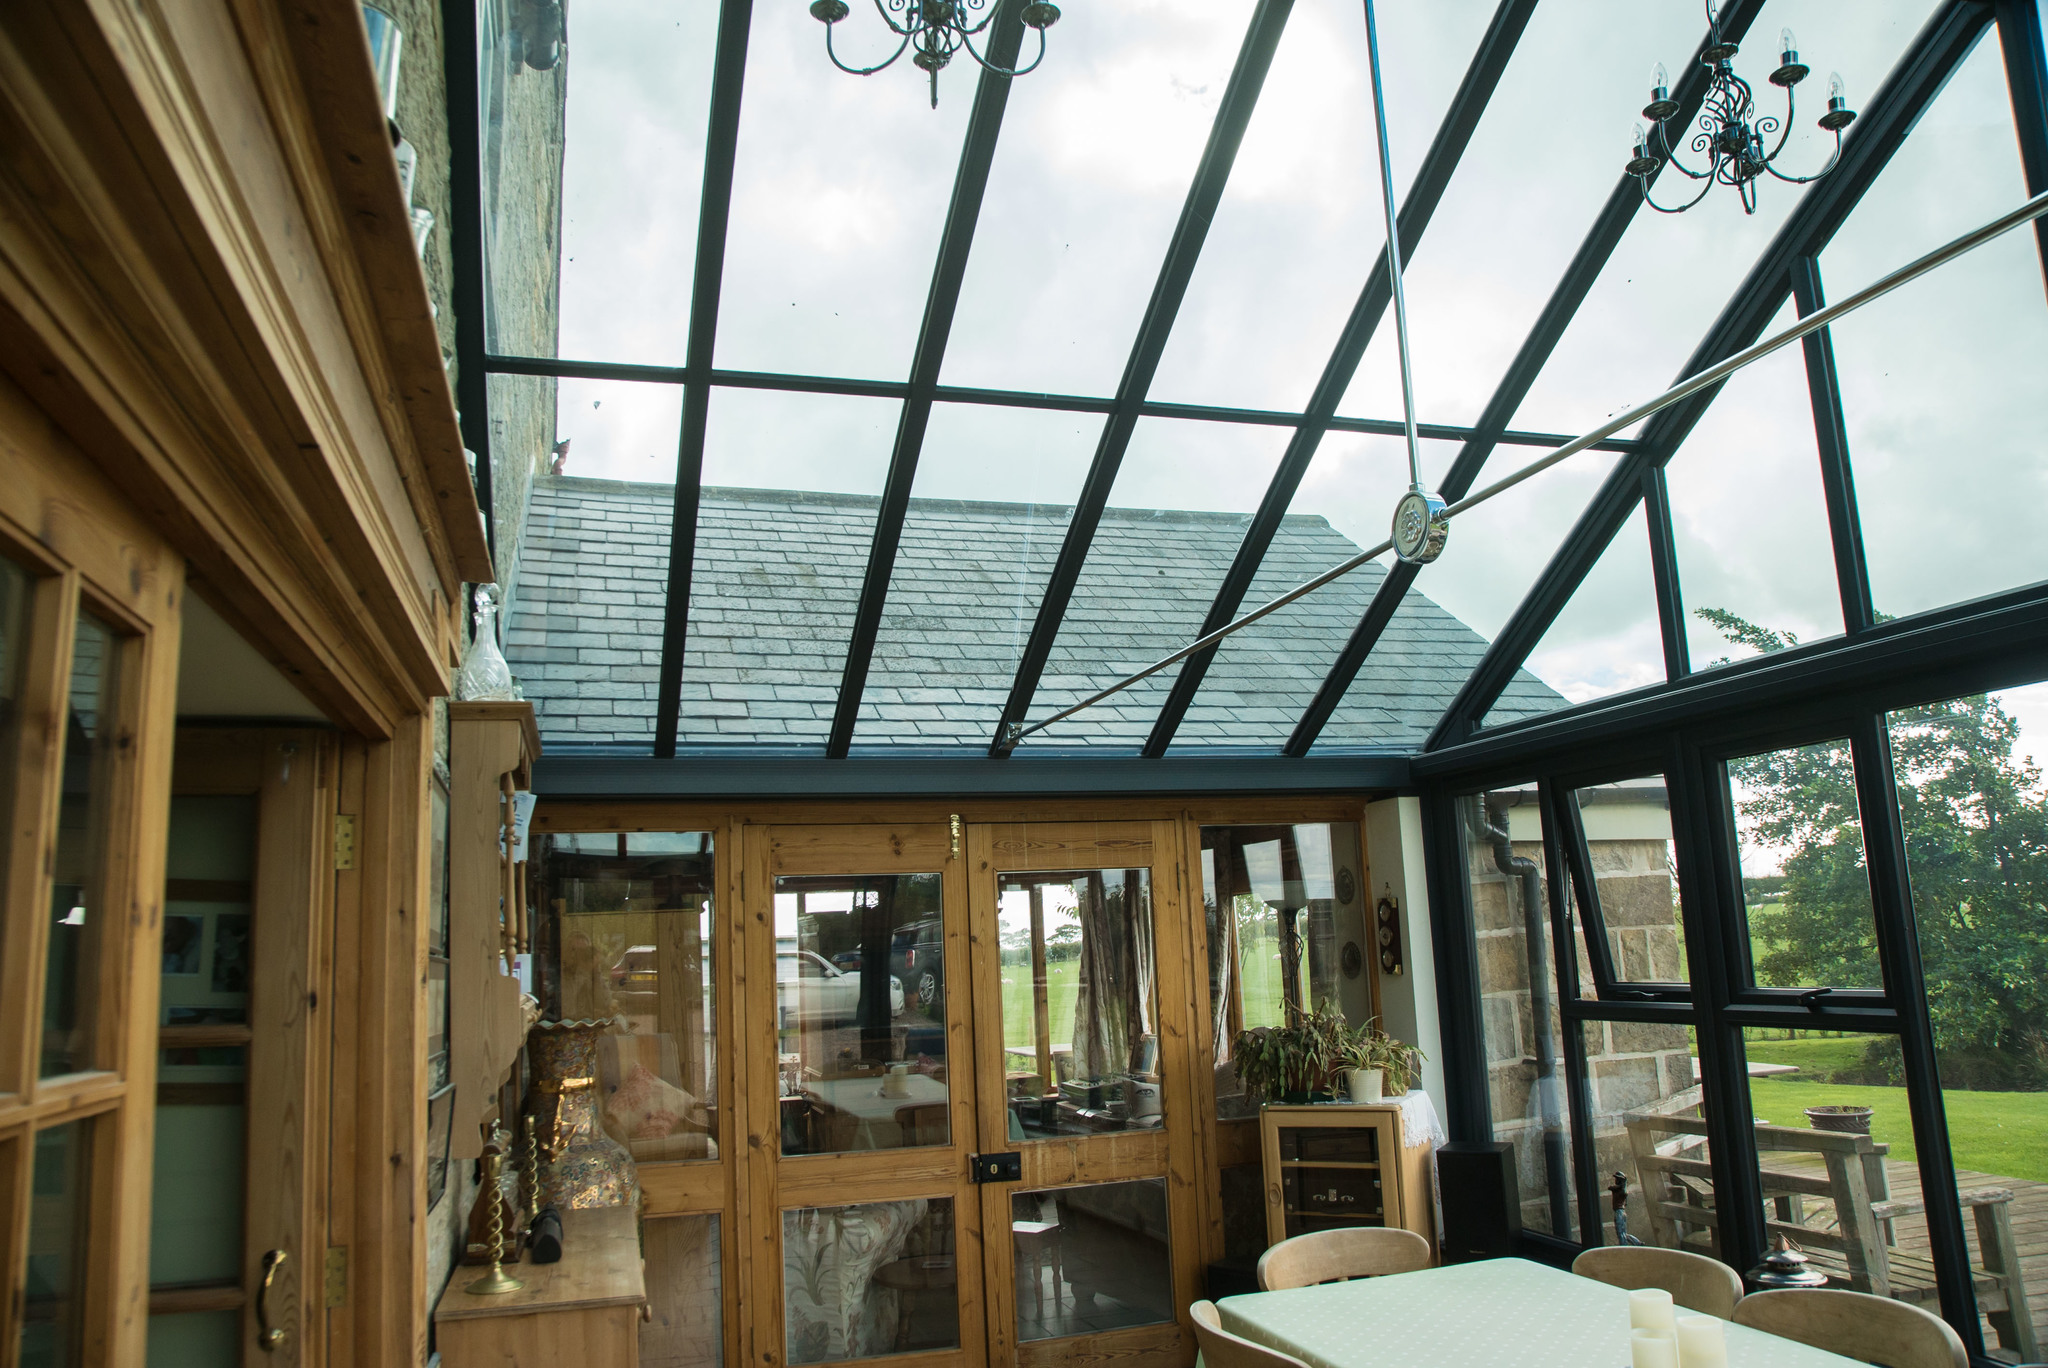 Interior view of a rustic-themed gable conservatory with a high-pitched ceiling, featuring exposed wooden beams, classic chandelier lighting, and a cozy seating arrangement, all bathed in the warm glow of natural light filtering through the expansive glass facade